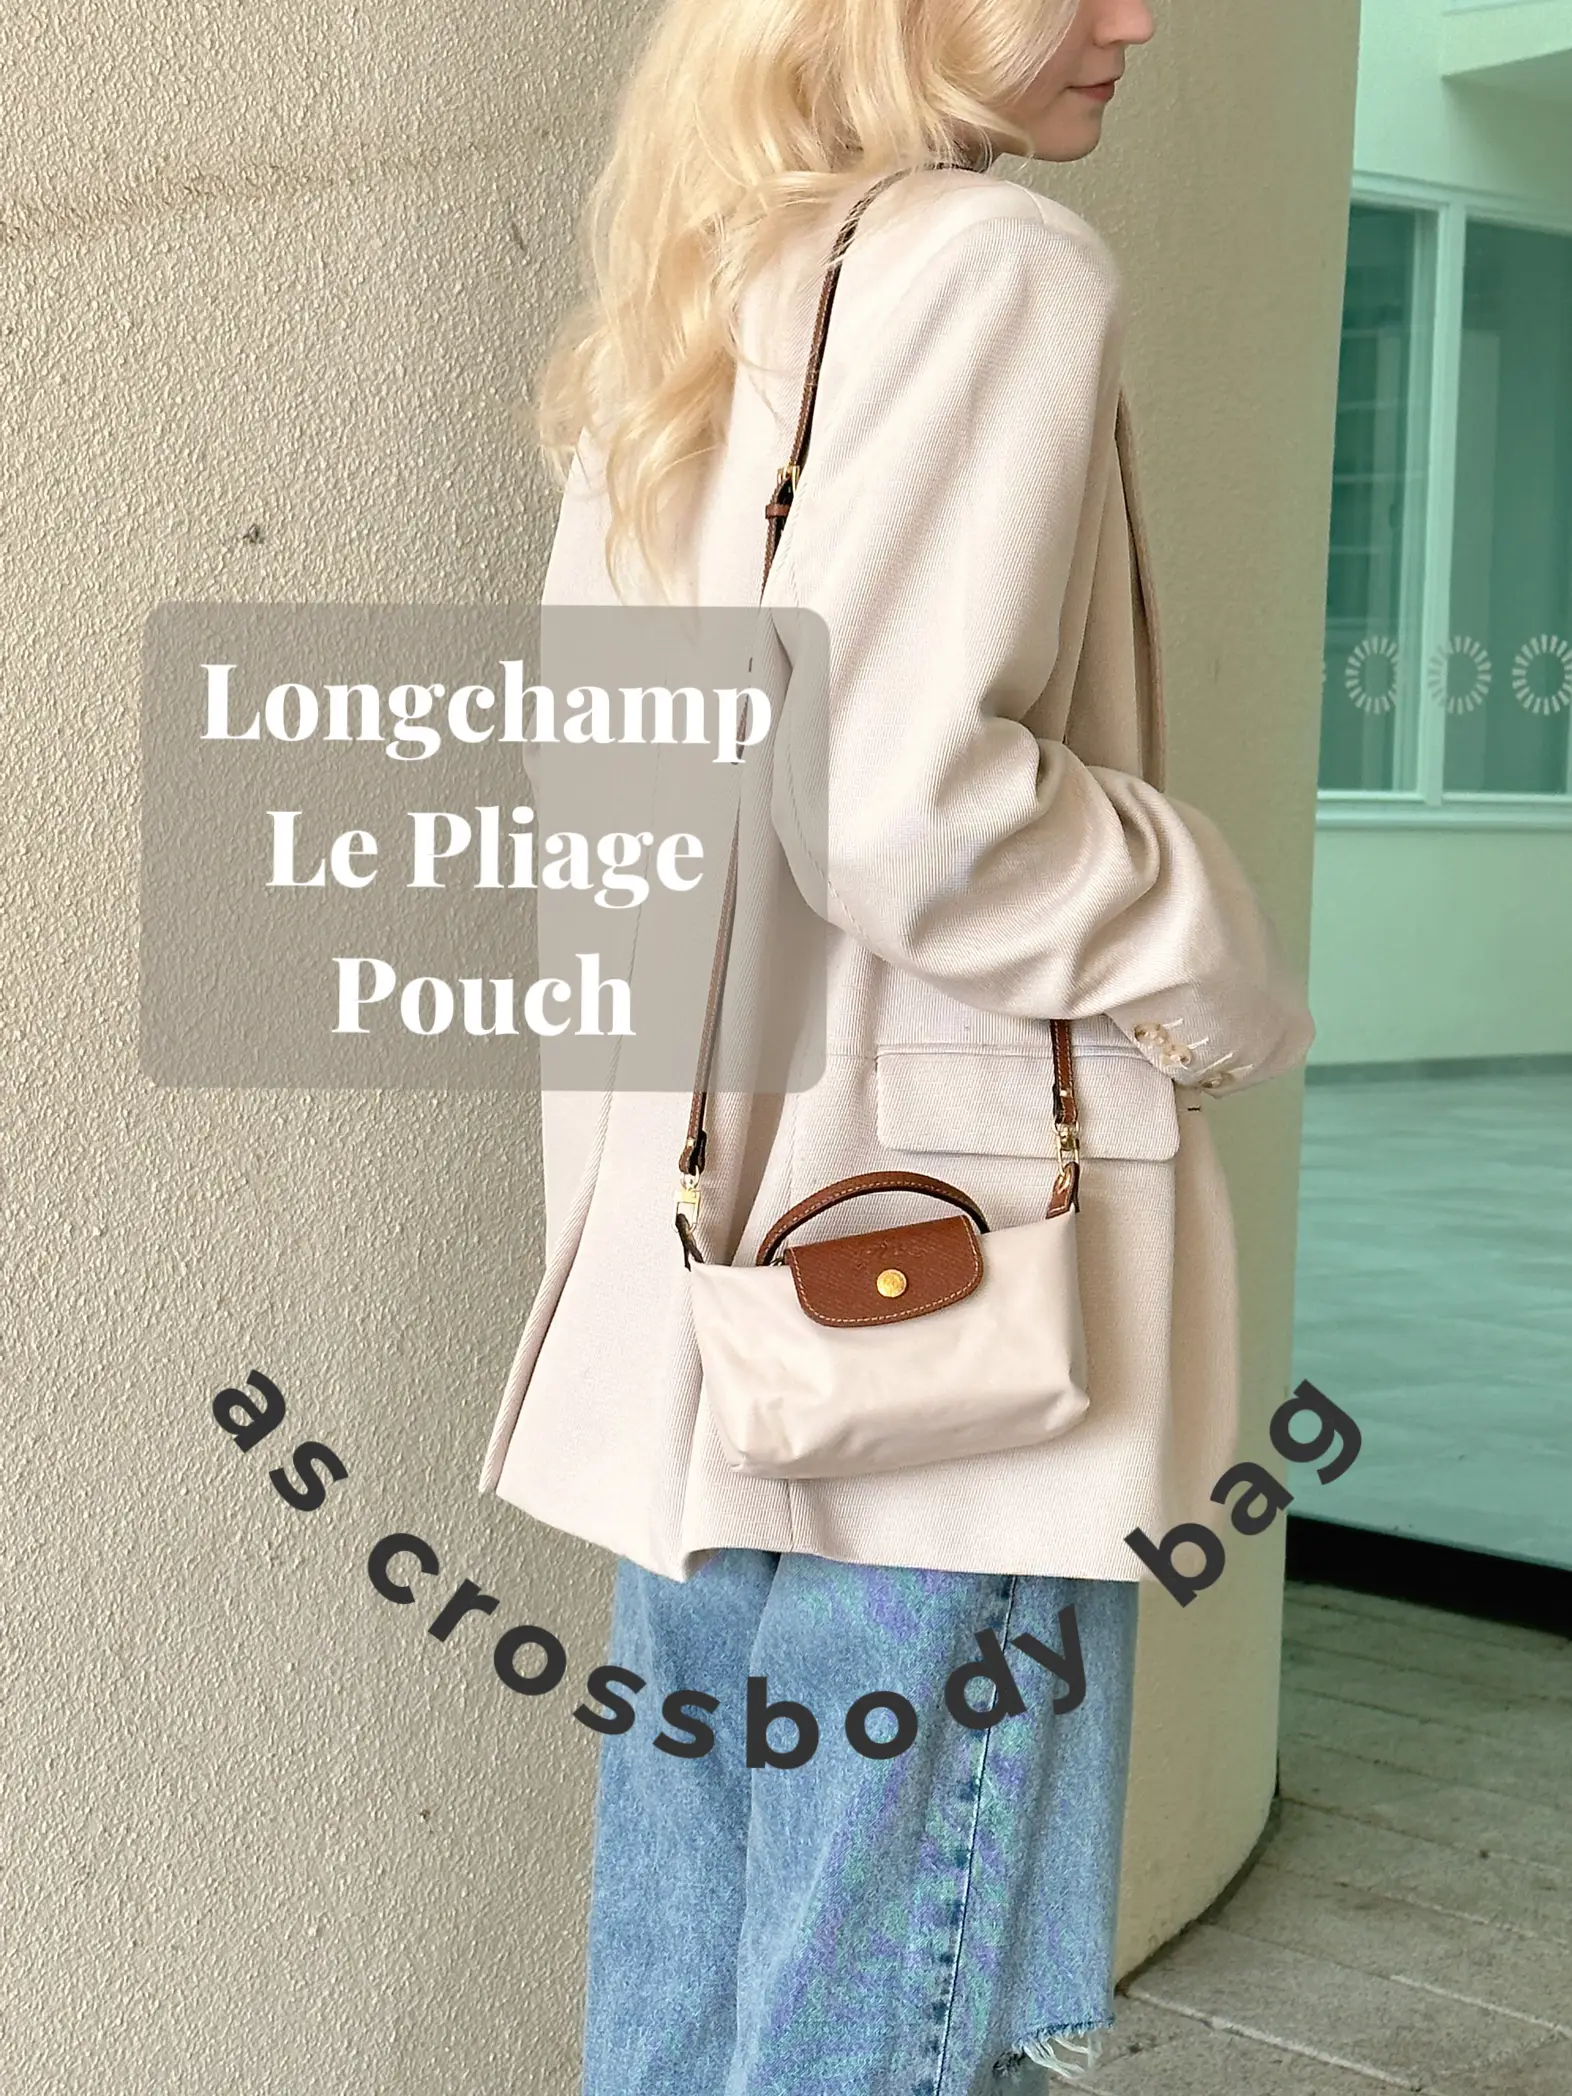 Crossbody Conversion Kit for Longchamp Le Pliage Pouch with Handle